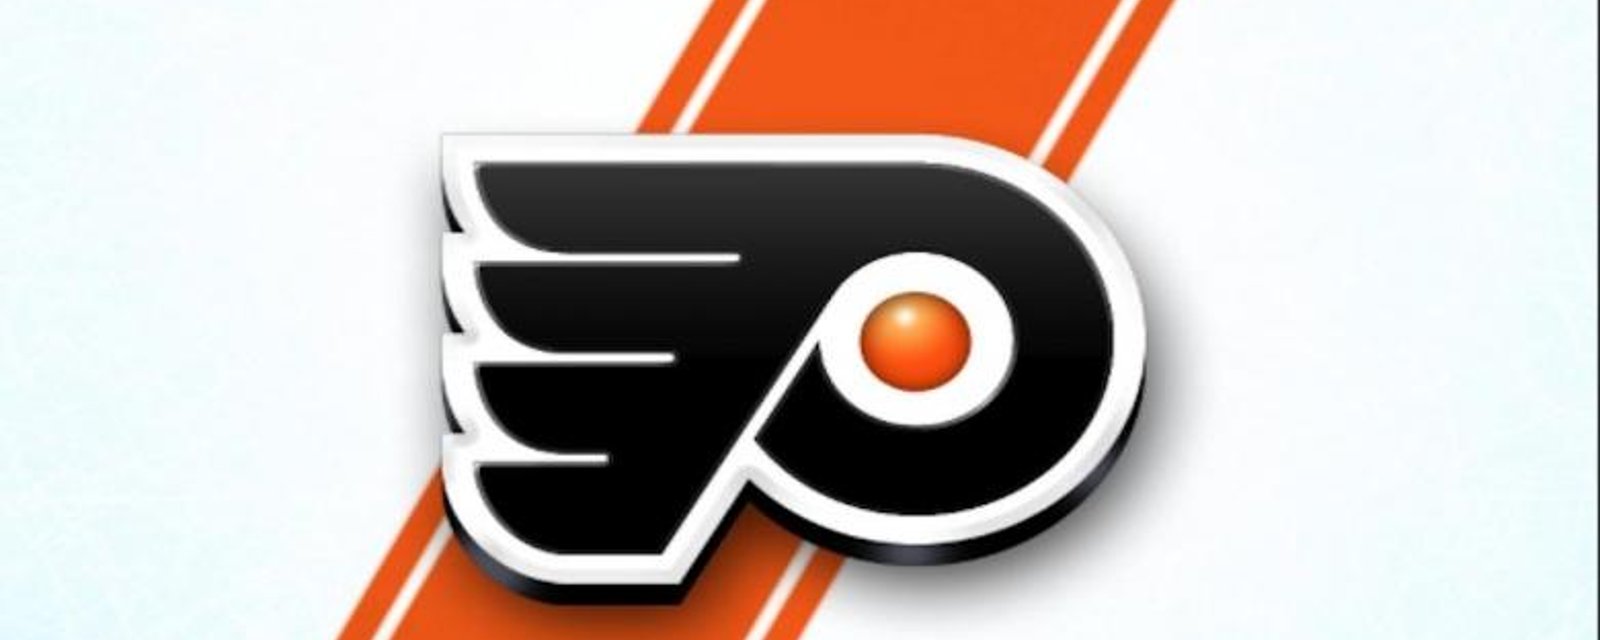 Flyers' player won't face further discipline.